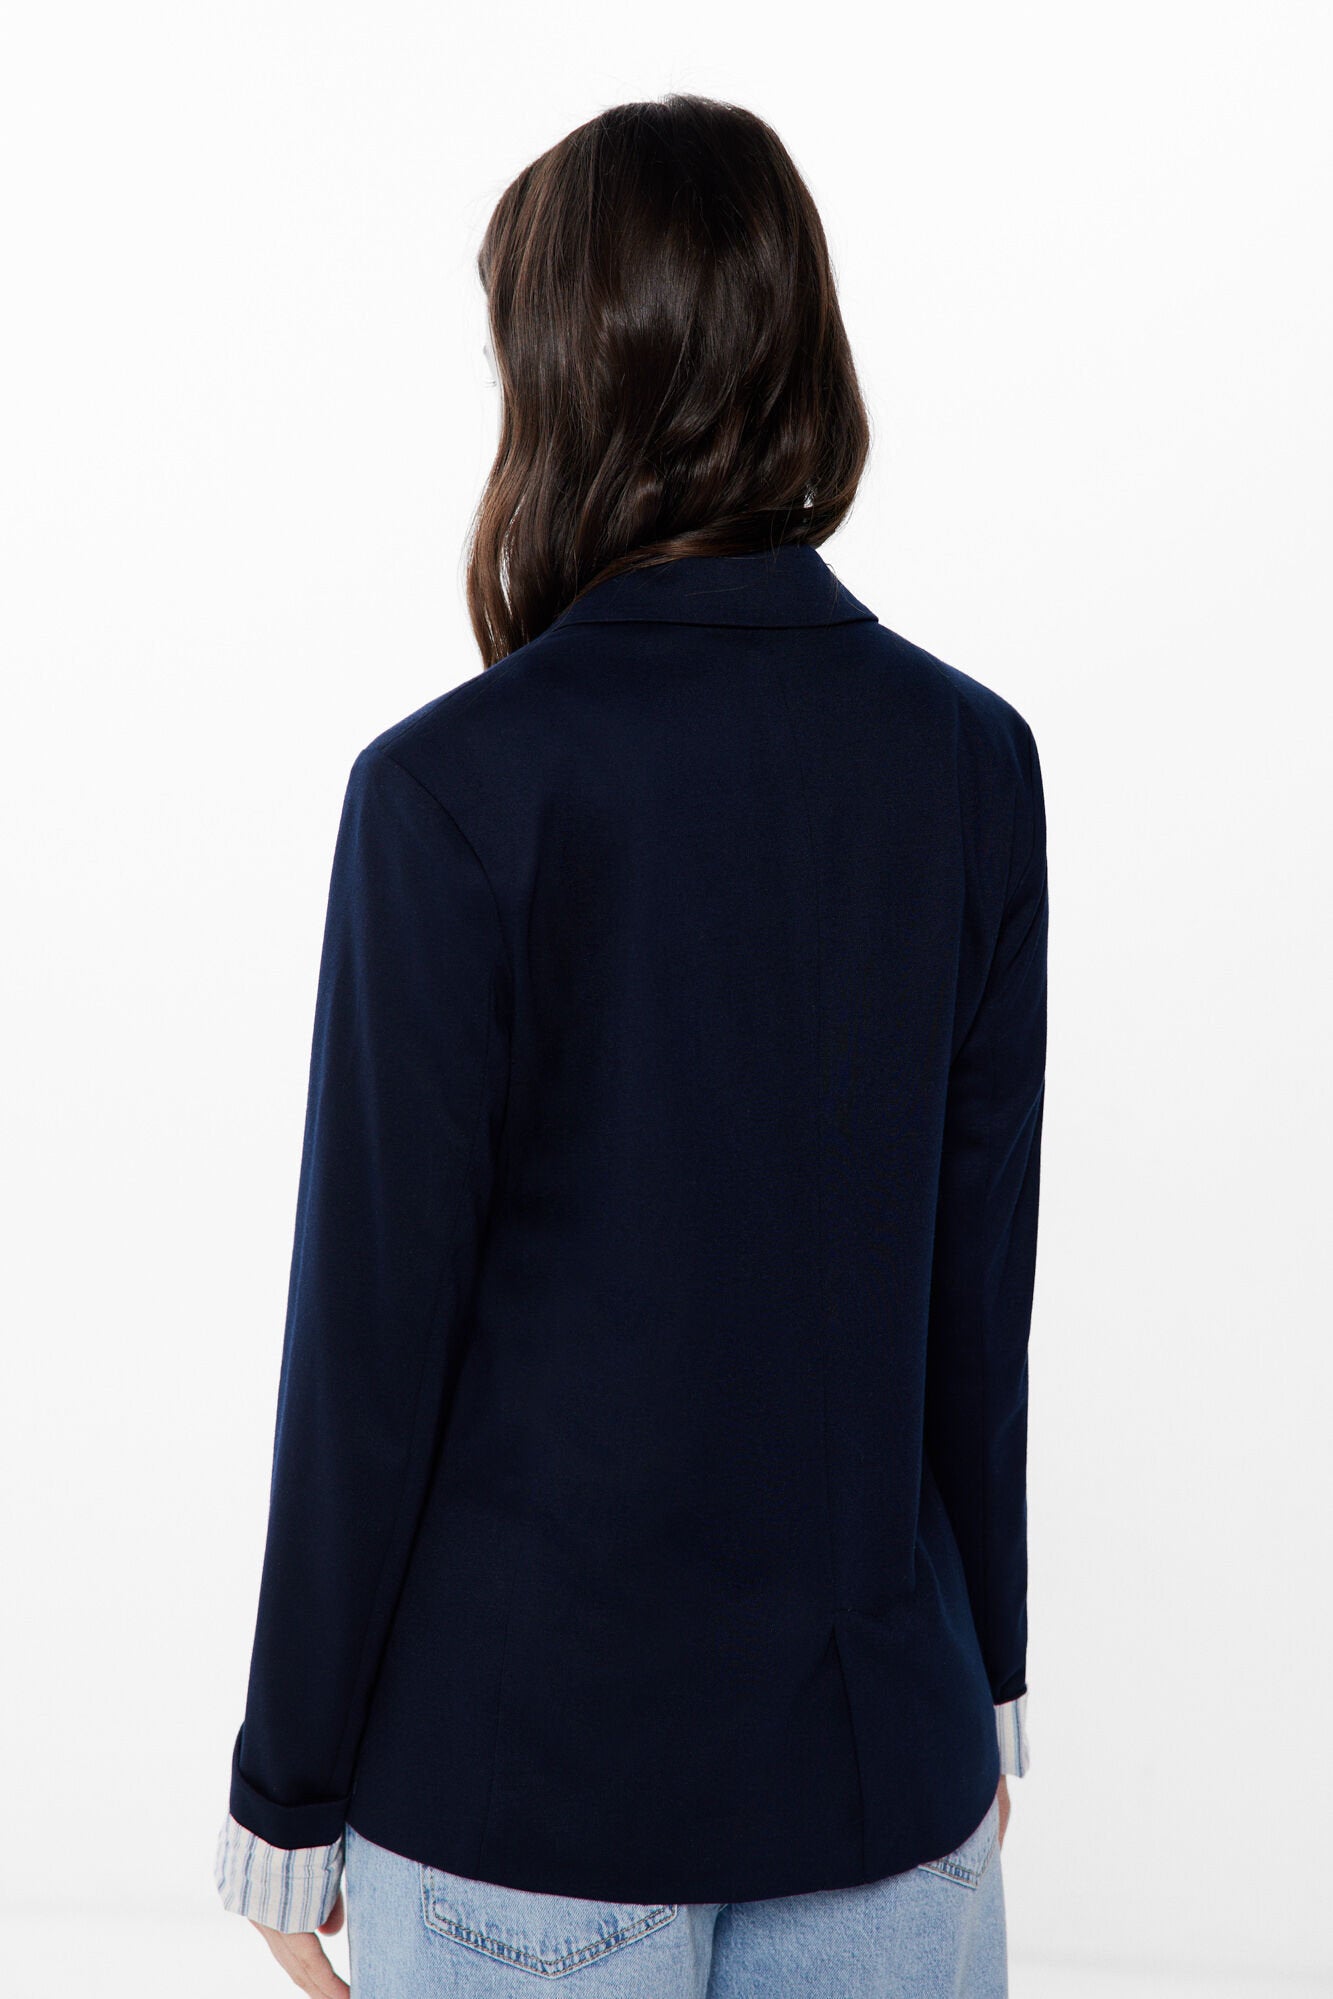 Blazer With Rolled Sleeves_8417373_14_05